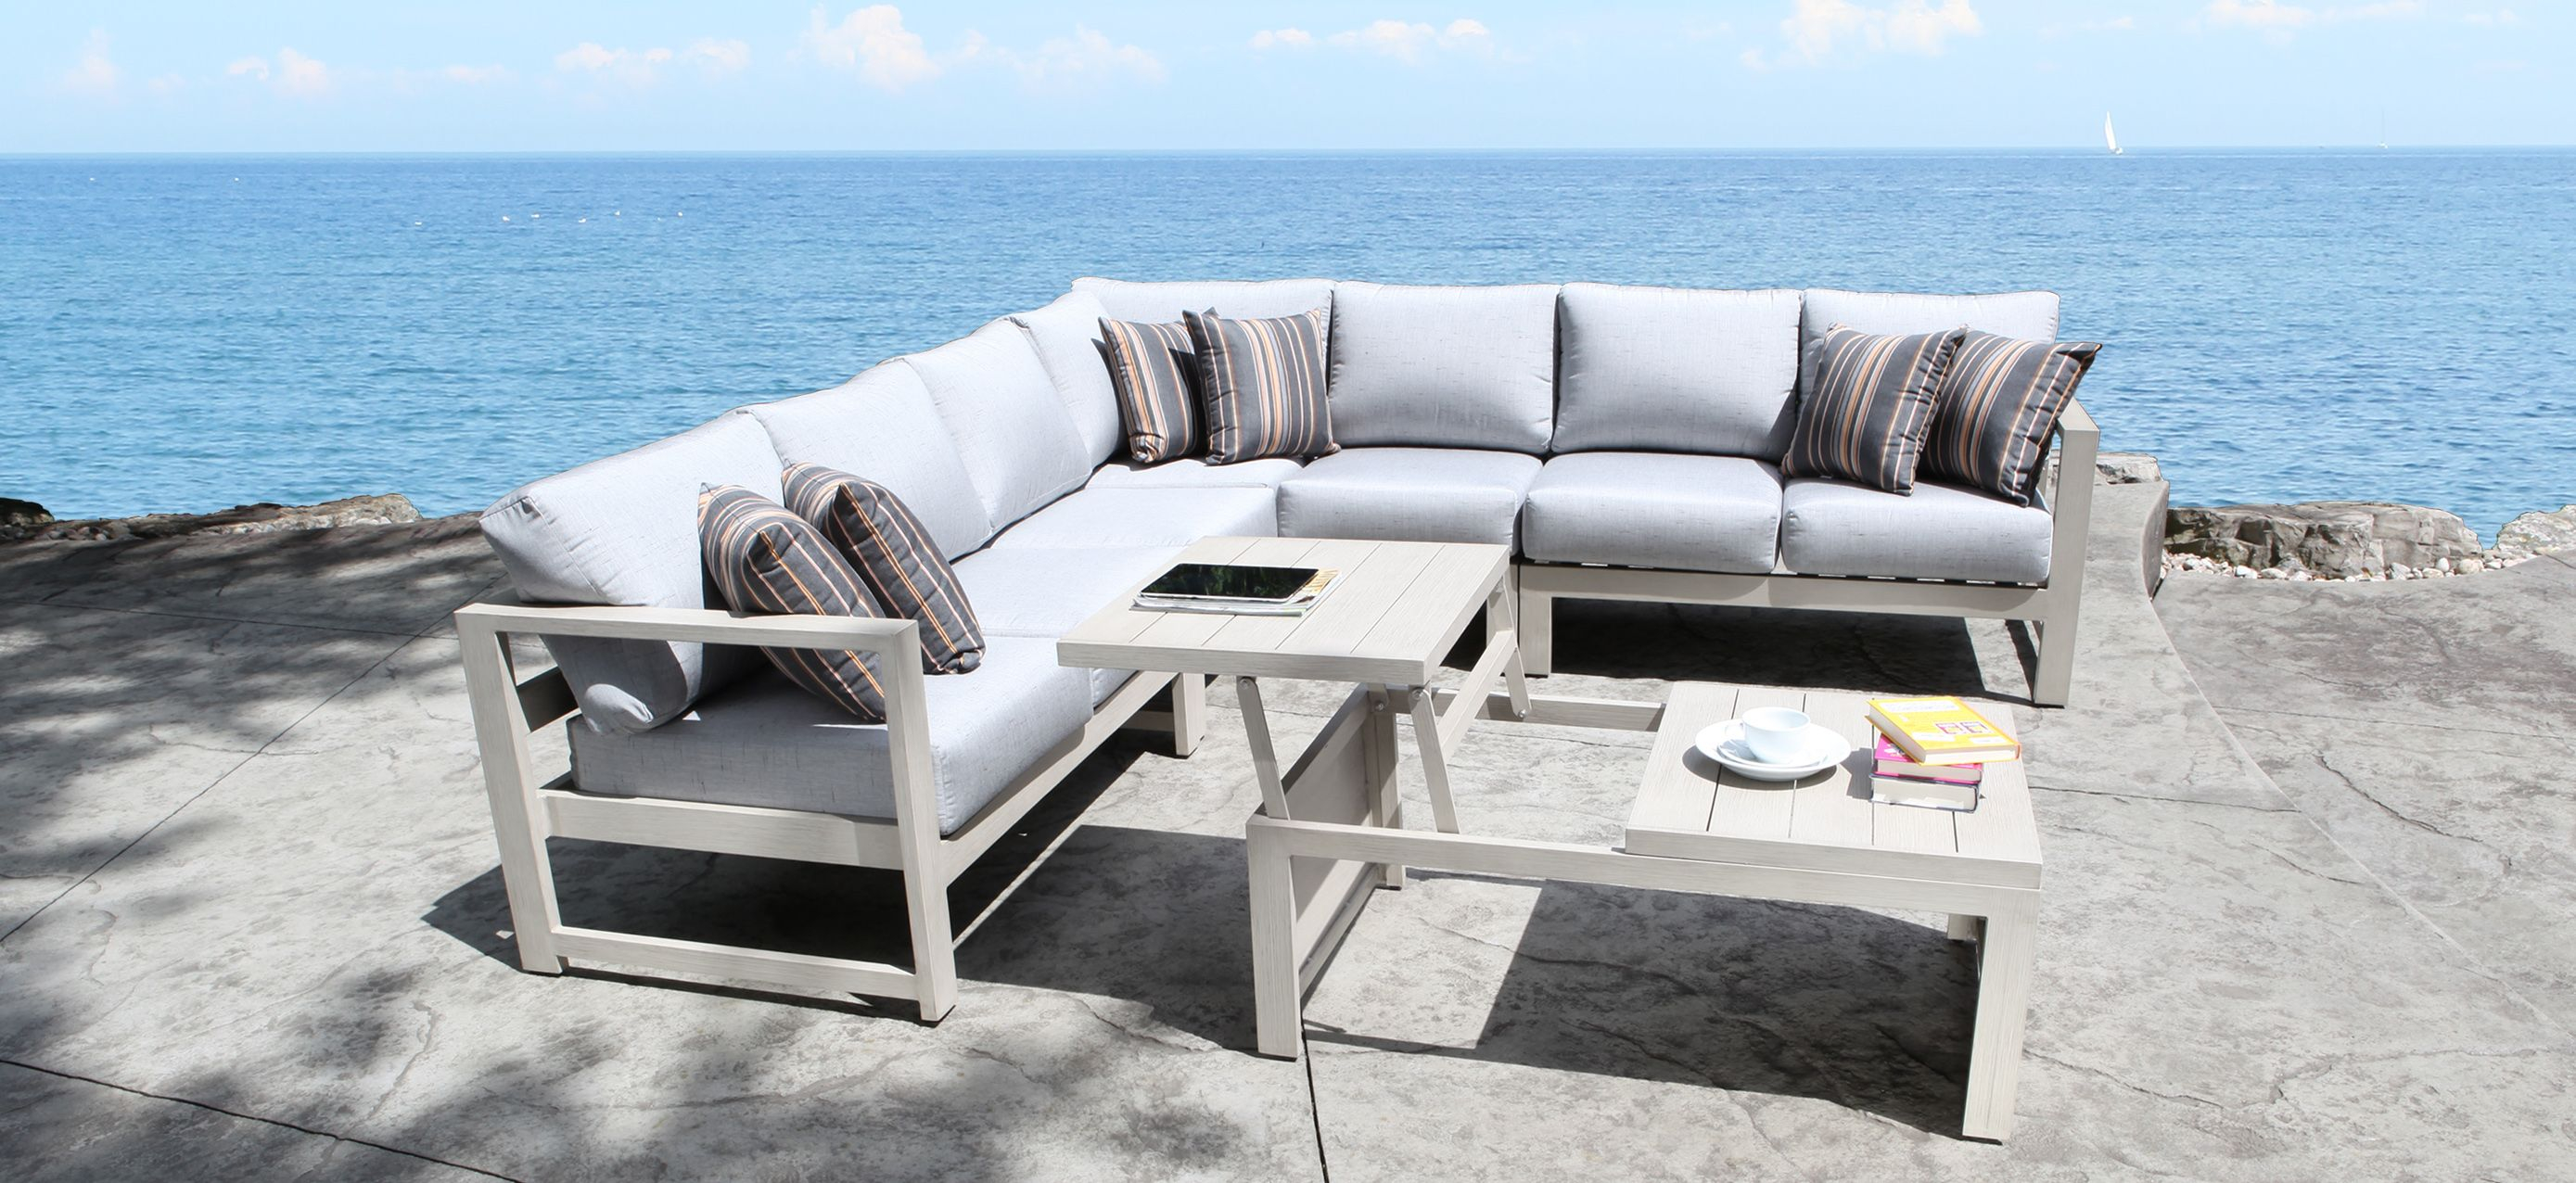 Cast Aluminum Patio Furniture Wynn Outdoor Sectional With throughout proportions 2778 X 1276